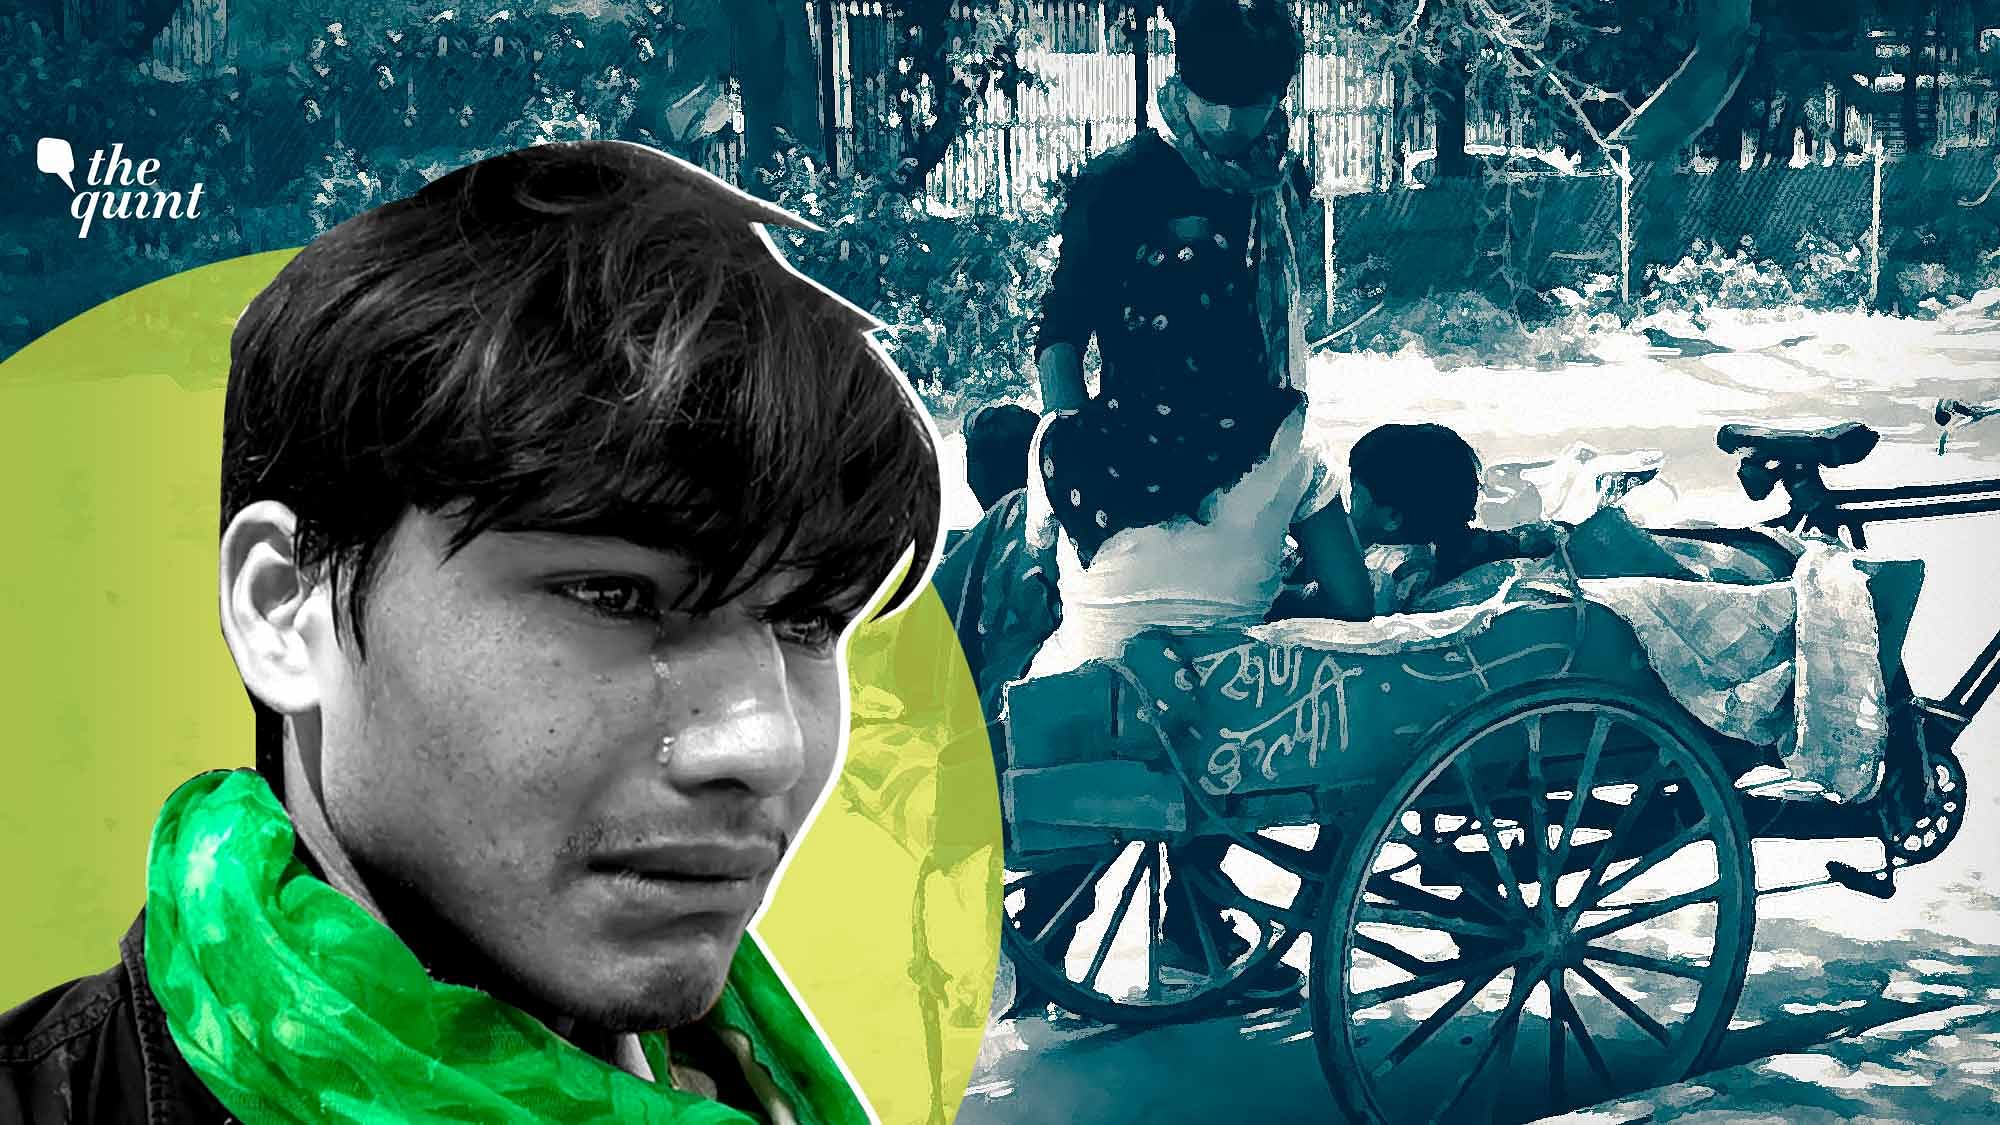 24-year-old Satvir, a migrant worker, was forced to leave his cart behind.